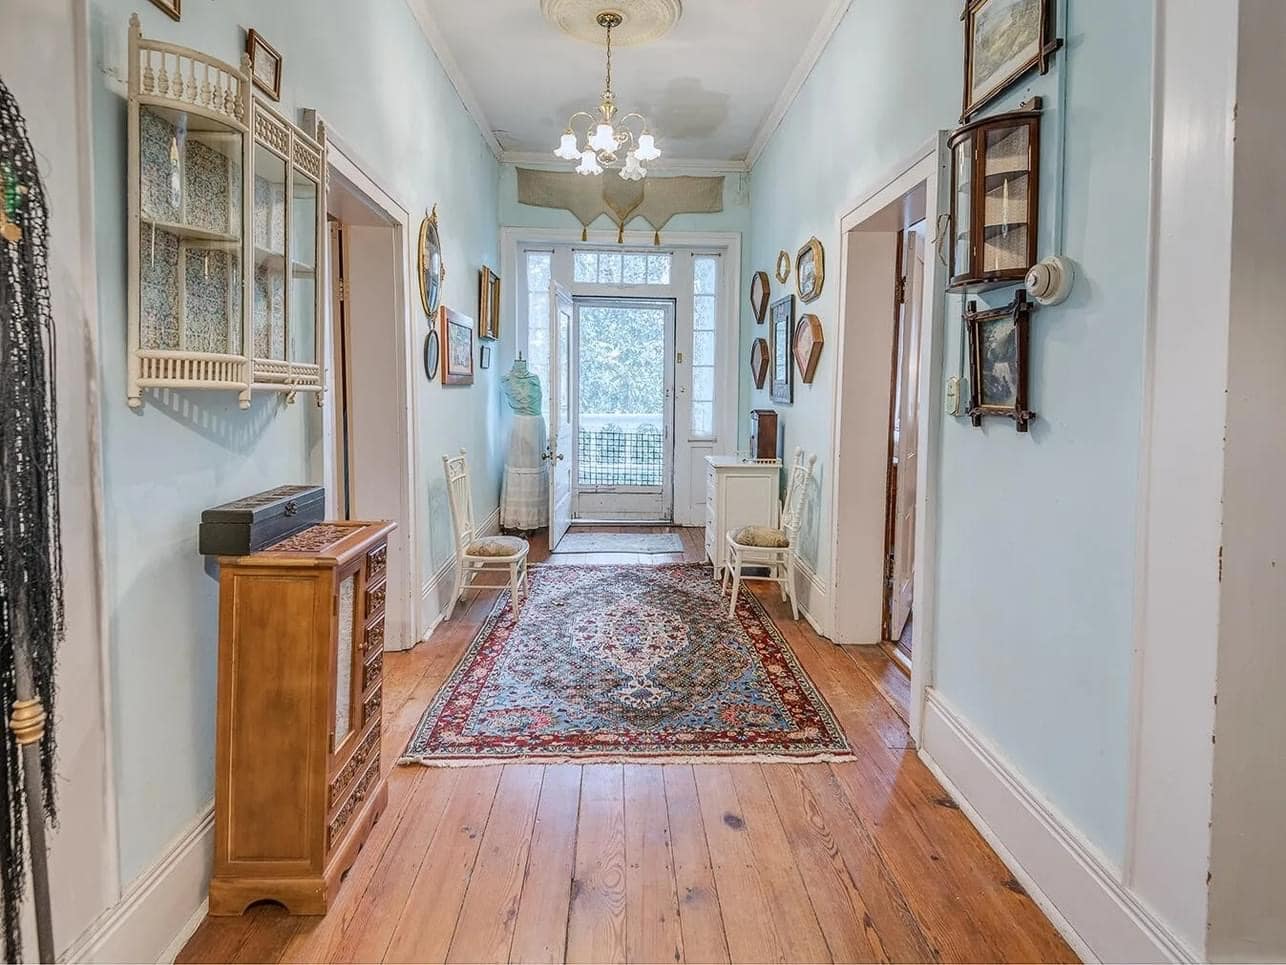 1820 Historic House For Sale In Greeneville Tennessee